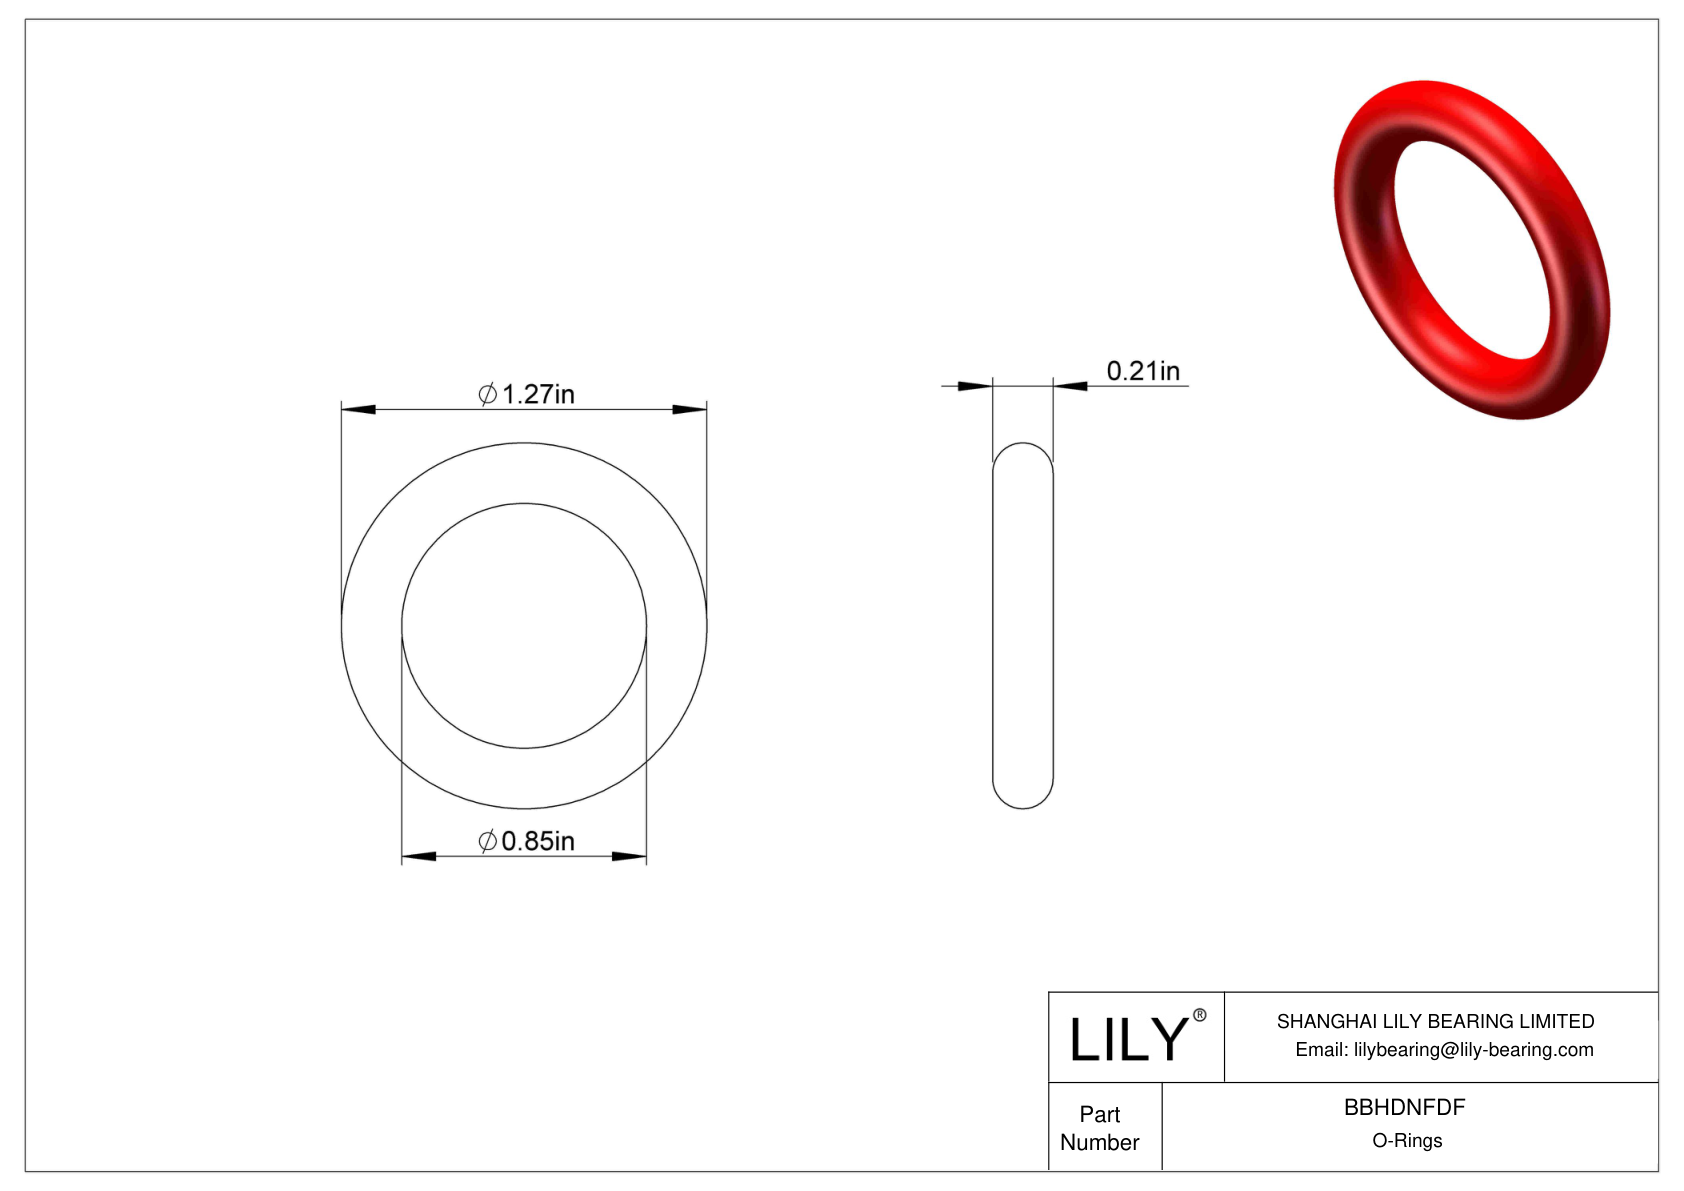 BBHDNFDF High Temperature O-Rings Round cad drawing